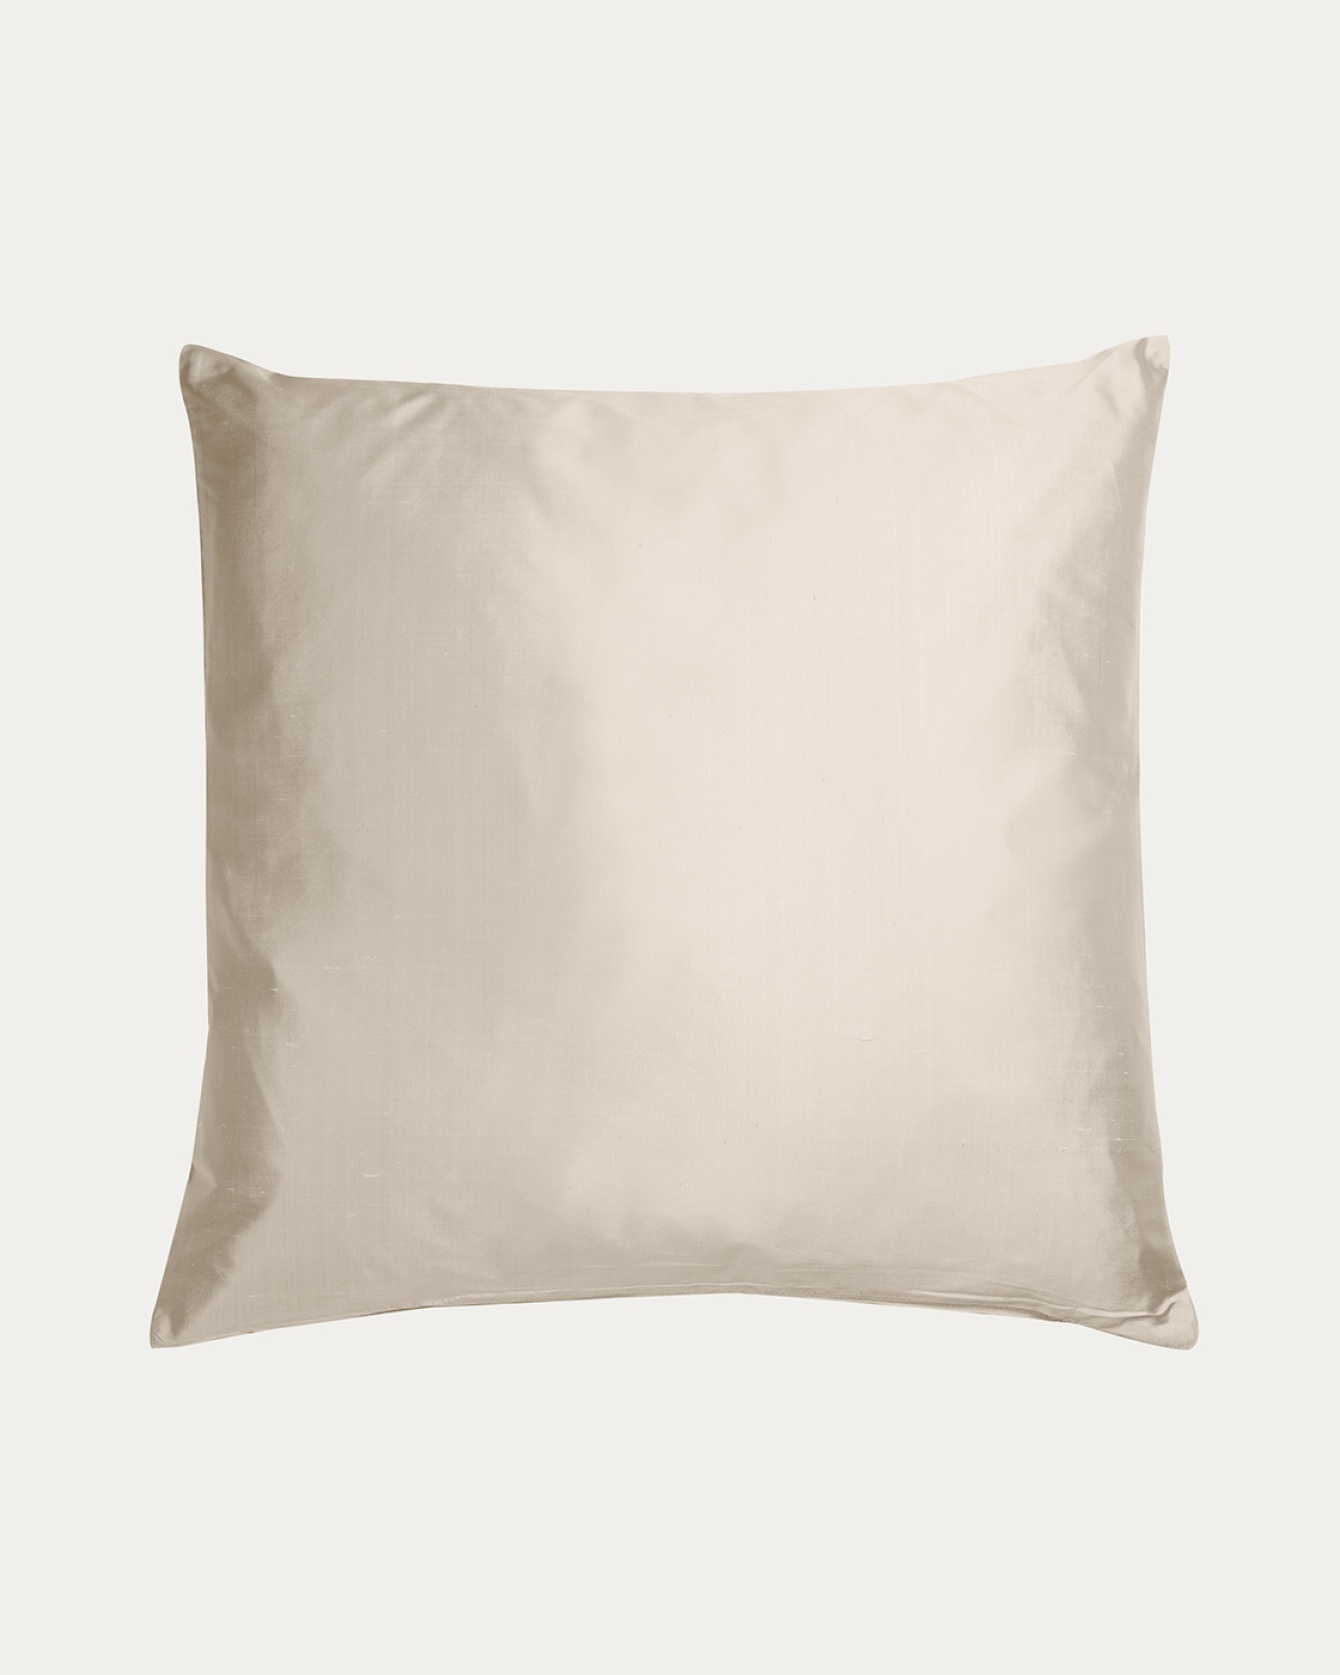 Product image light beige SILK cushion cover made of 100% dupion silk that gives a nice lustre from LINUM DESIGN. Size 50x50 cm.